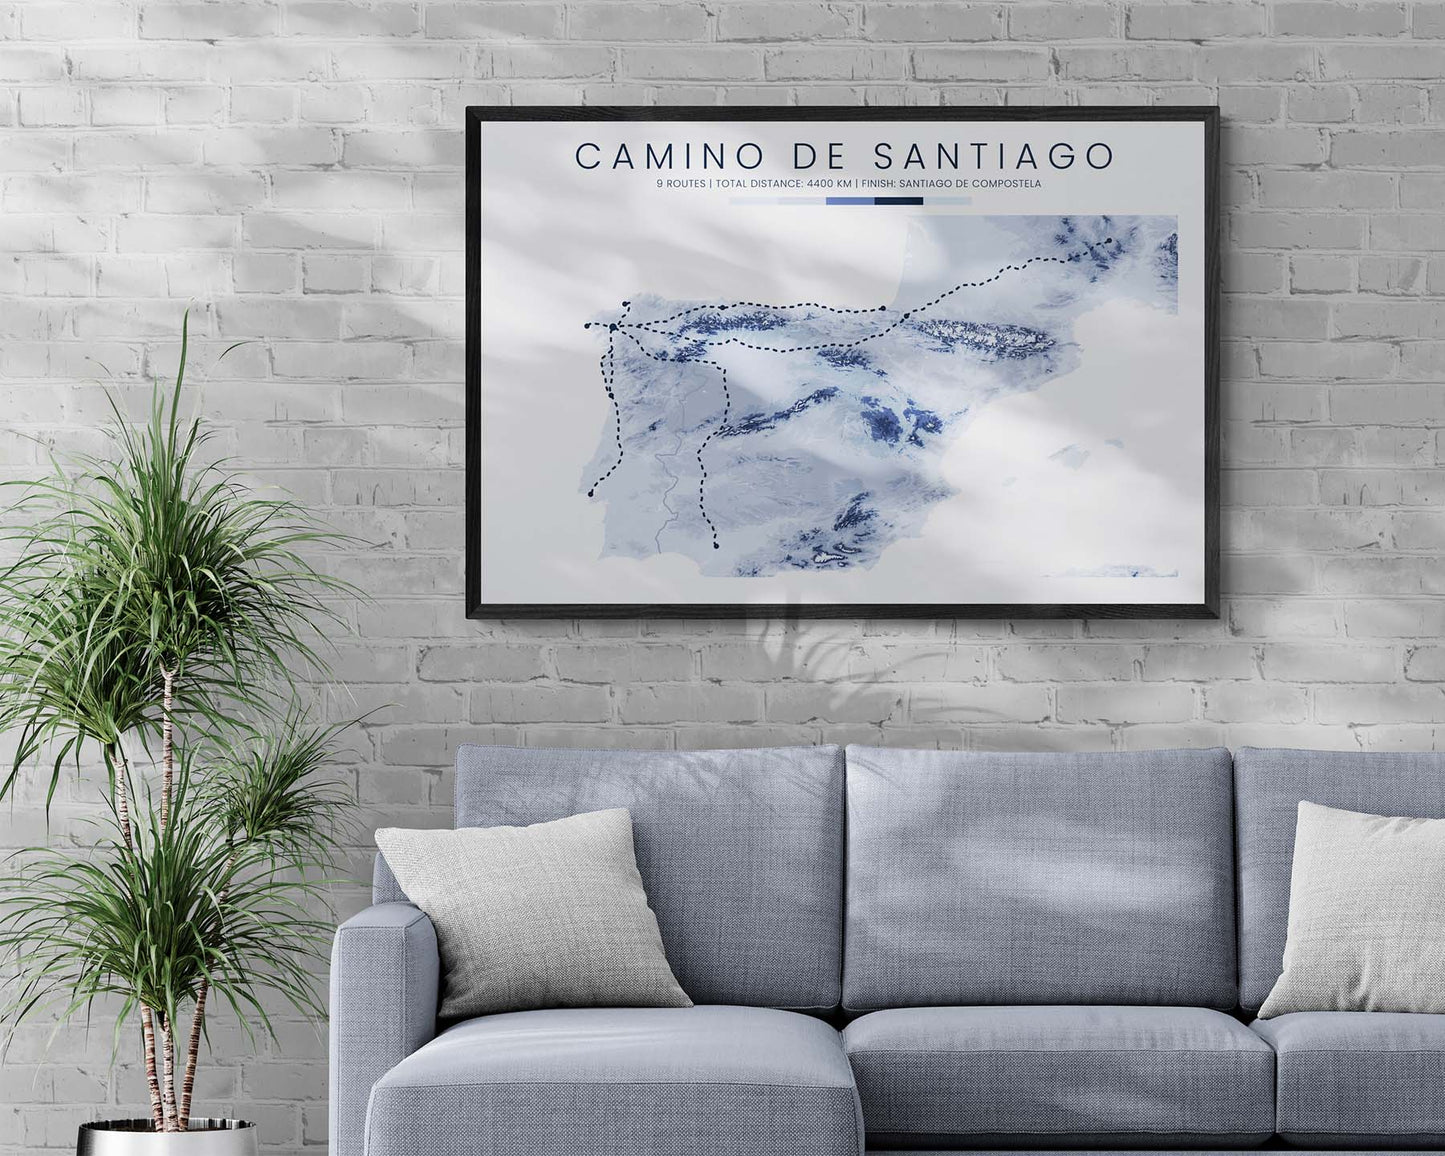 Pilgrimage of Compostela (Camino Portugues) Trek Print with Shaded Relief Map in Modern Living Room Decor